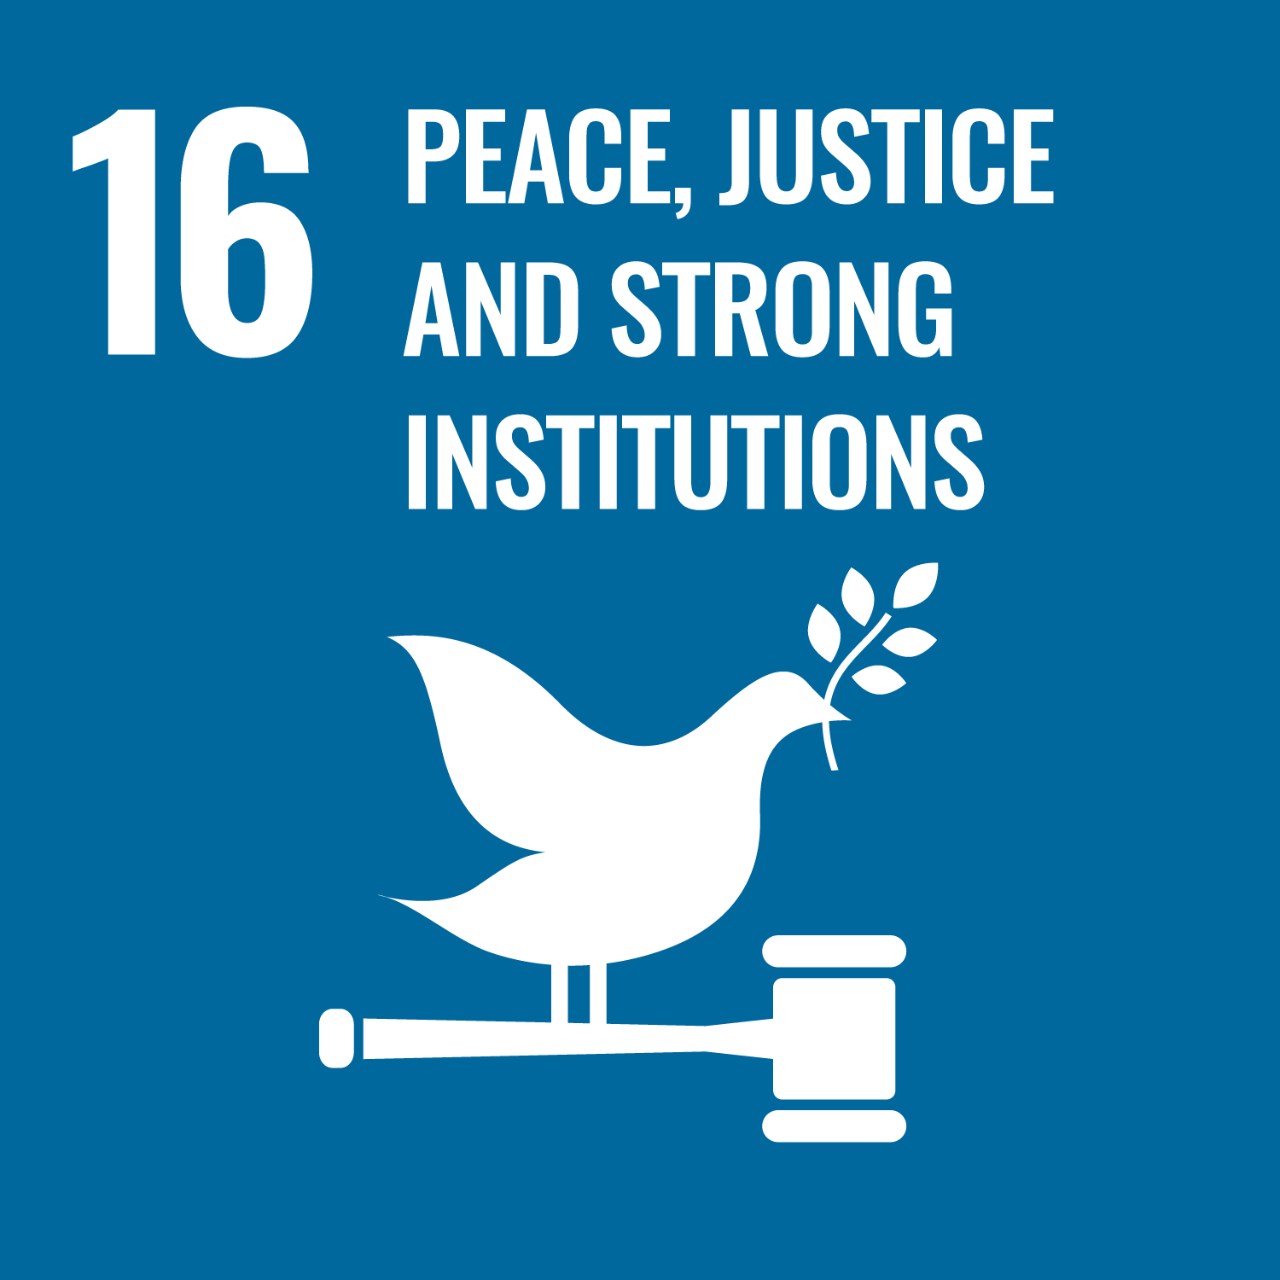 Blue icon with graphic of dove on gavel to represent UNSDG Goal 16: Peace, Justice and Strong Institutions.